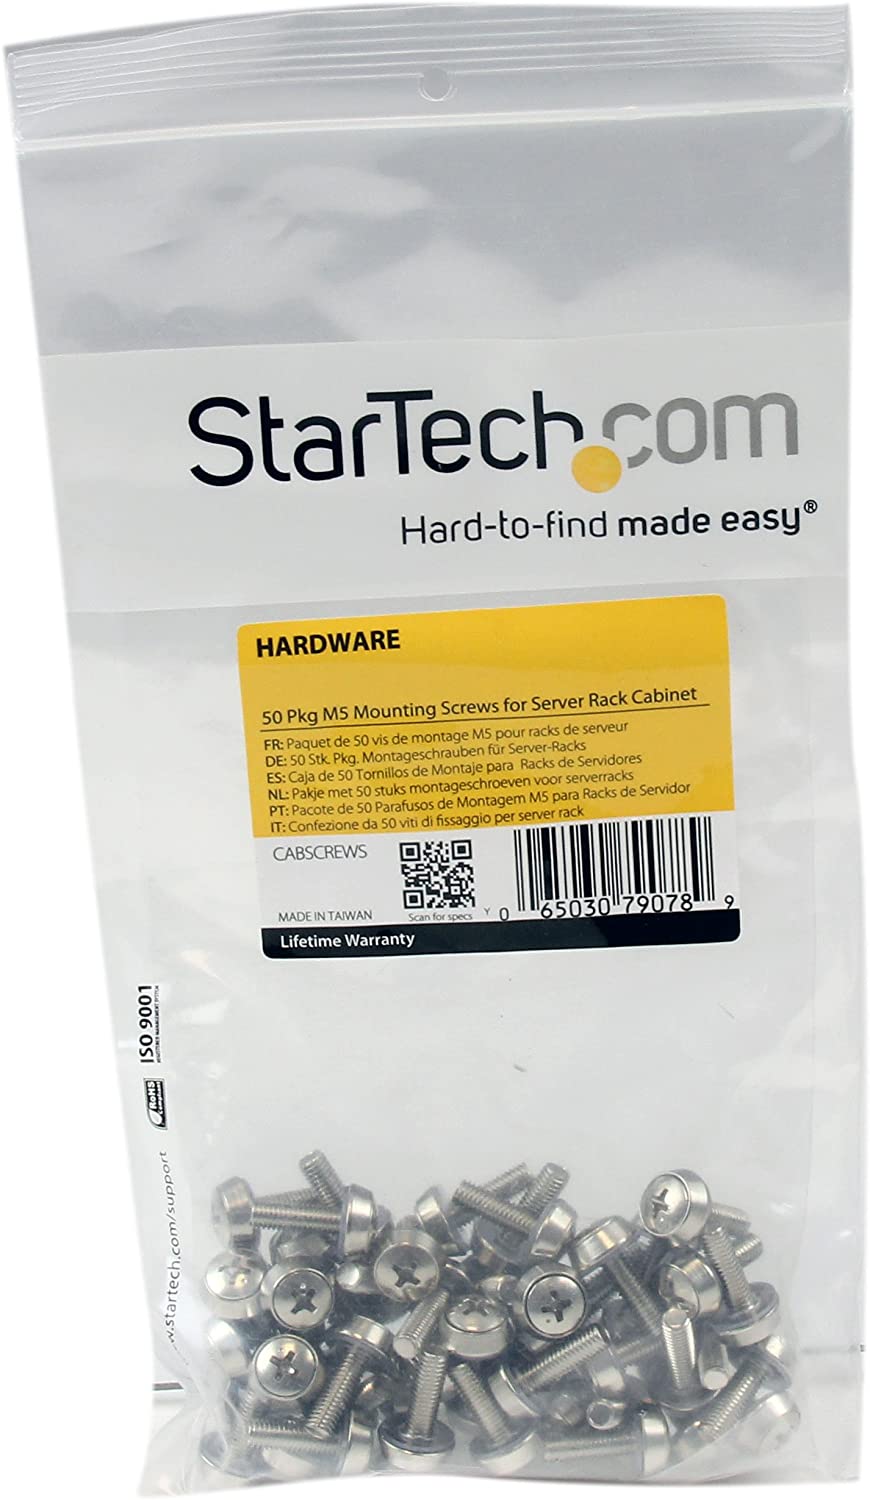 StarTech.com M5 Mounting Screws for Server Racks and Cabinets - 50 Pack - Screw kit (pack of 50) - CABSCREWS Silver Mounting Screws Silver Mounting Screws